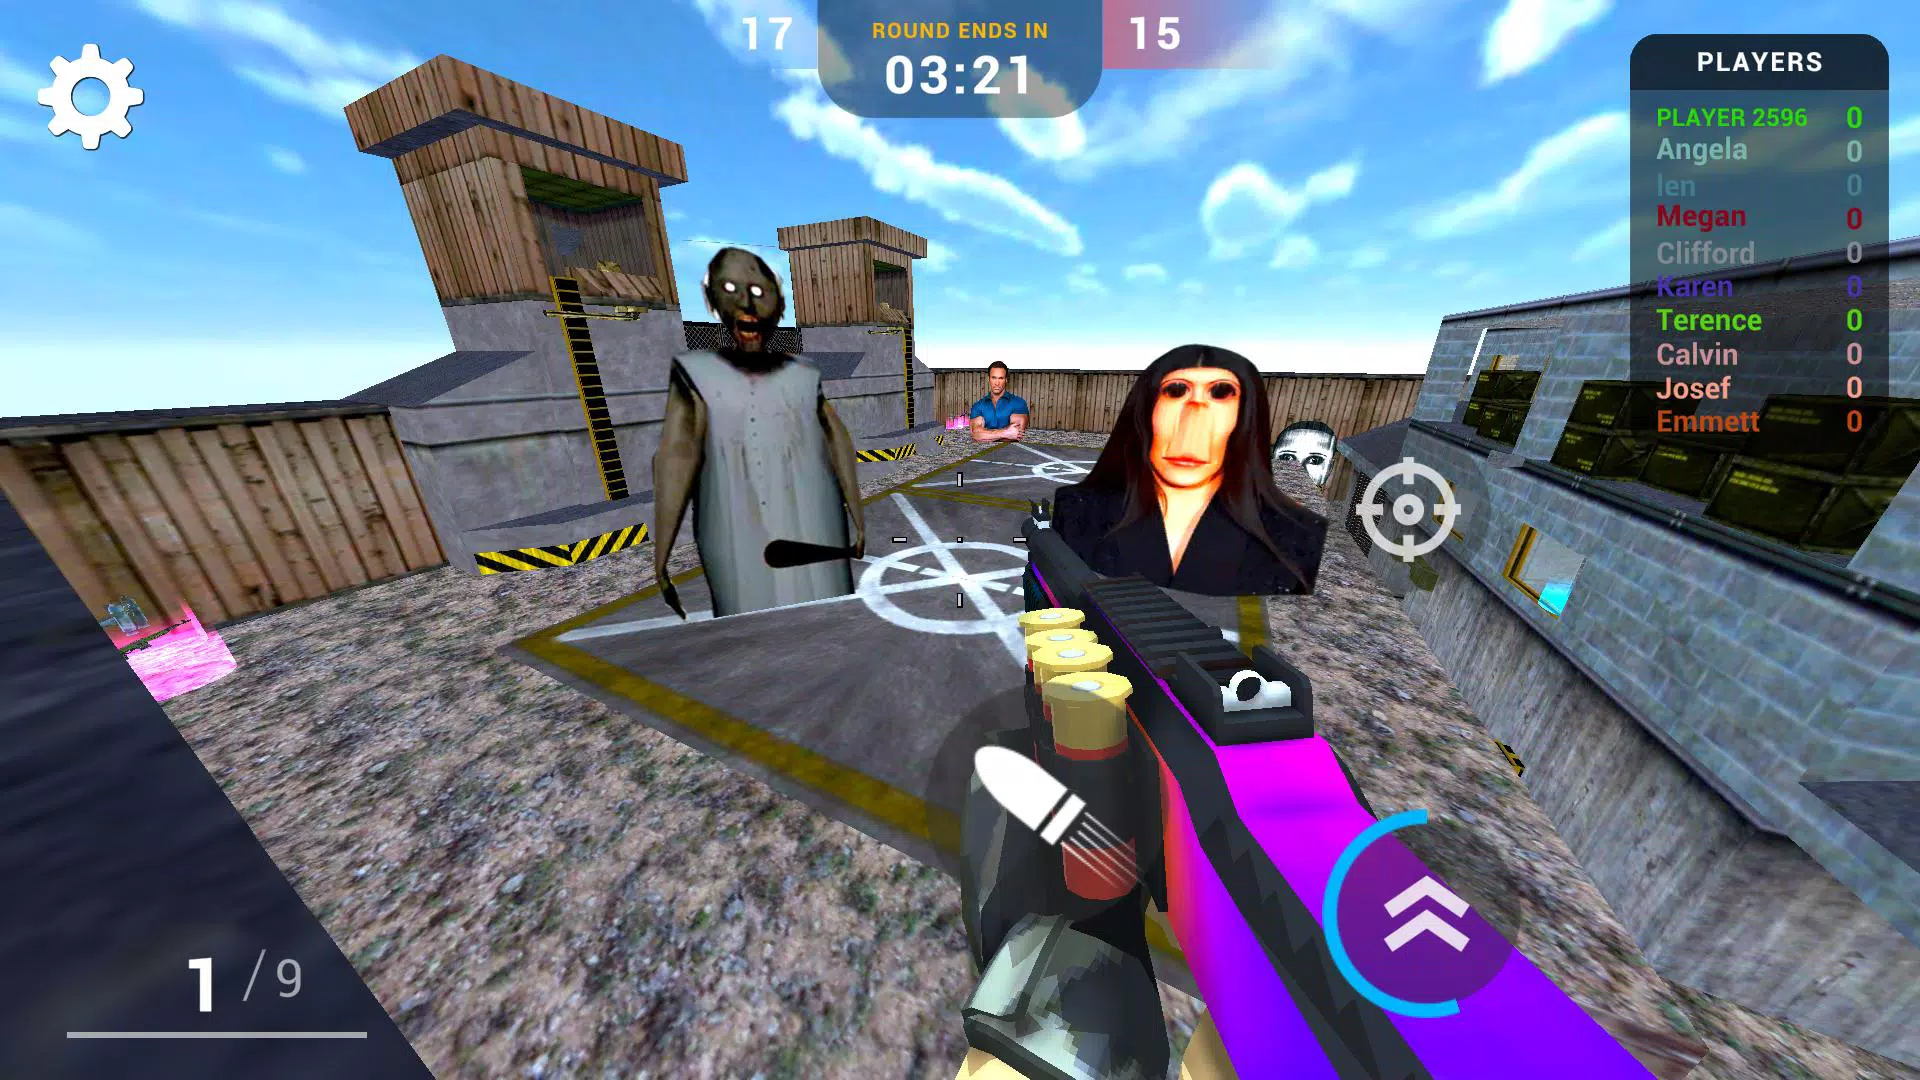 Nextbots In Backrooms Shooter Mod Apk Unlimited Money No Ads Download下载- Nextbots In Backrooms Shooter Mod Apk Unlimited Money No Ads Download  4.9-APK3 Android website